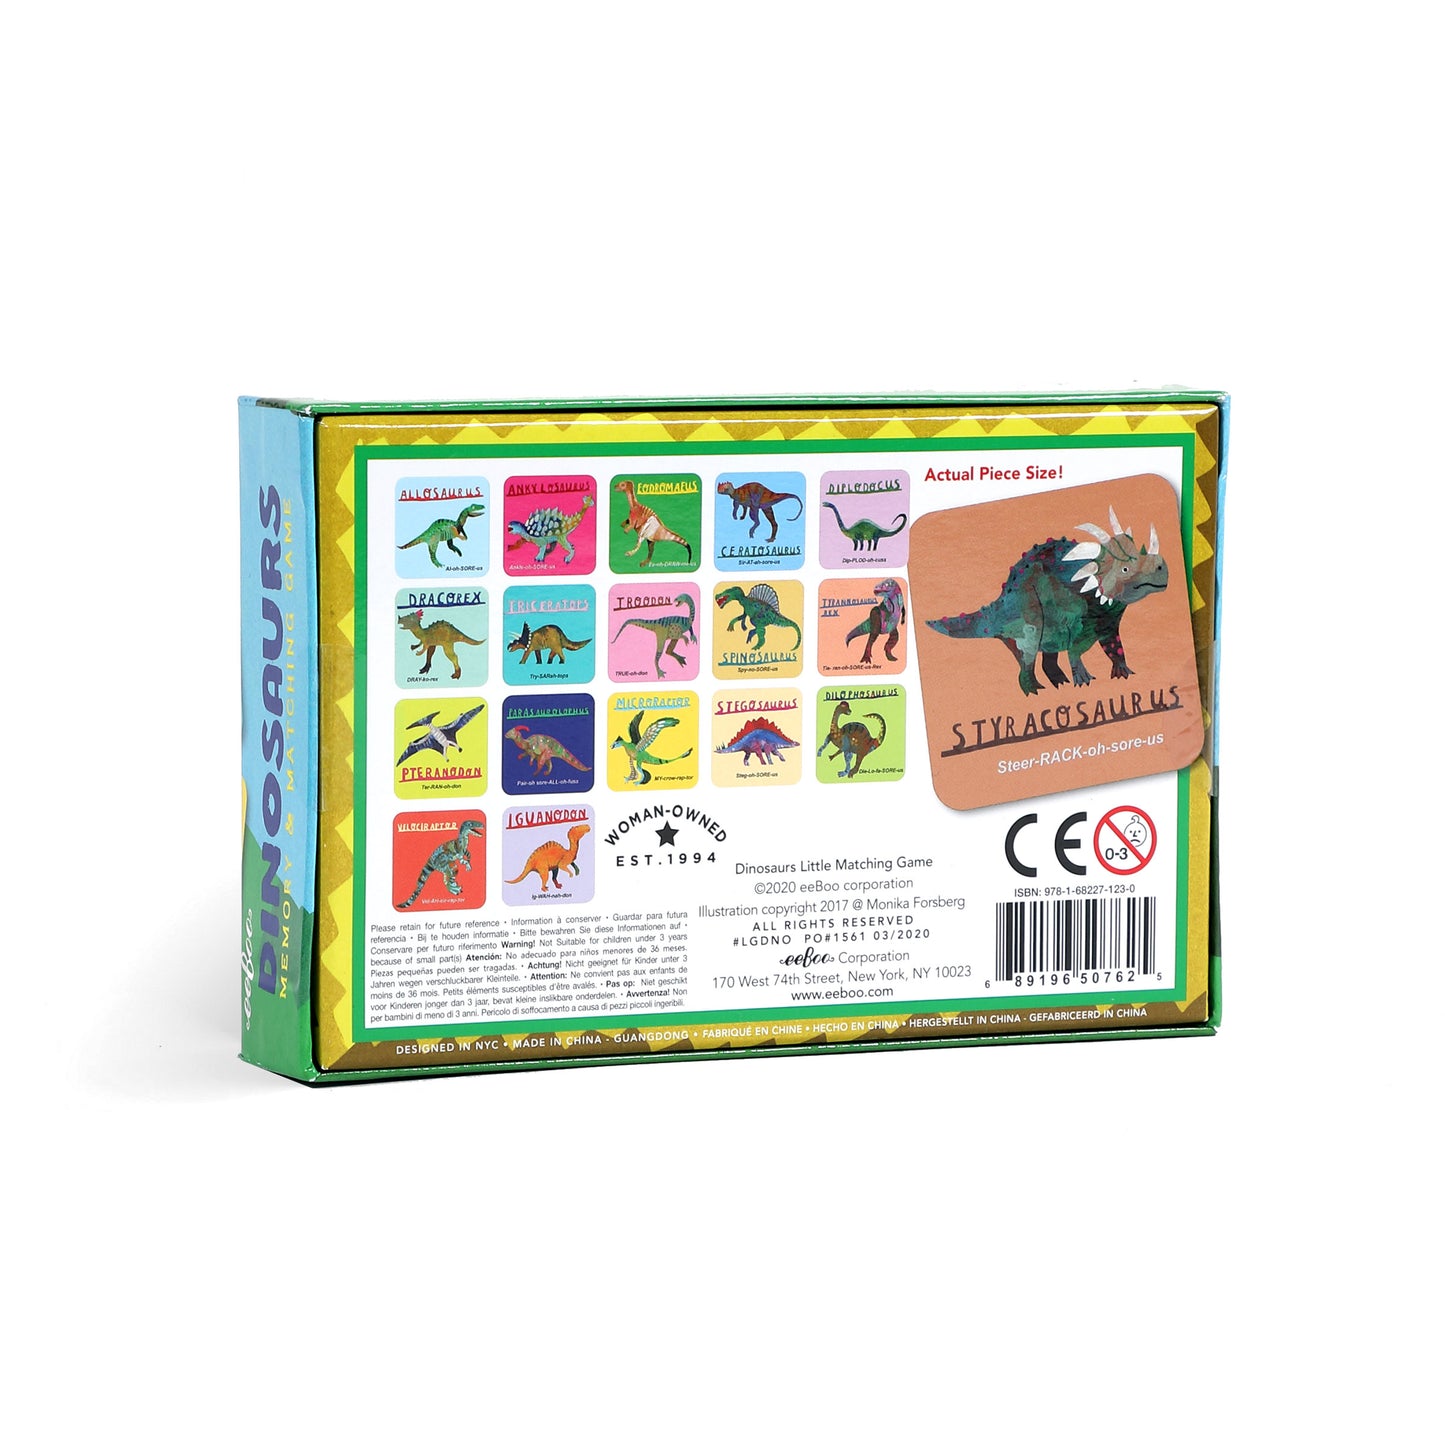 Dinosaurs Little Memory and Matching Game eeBoo